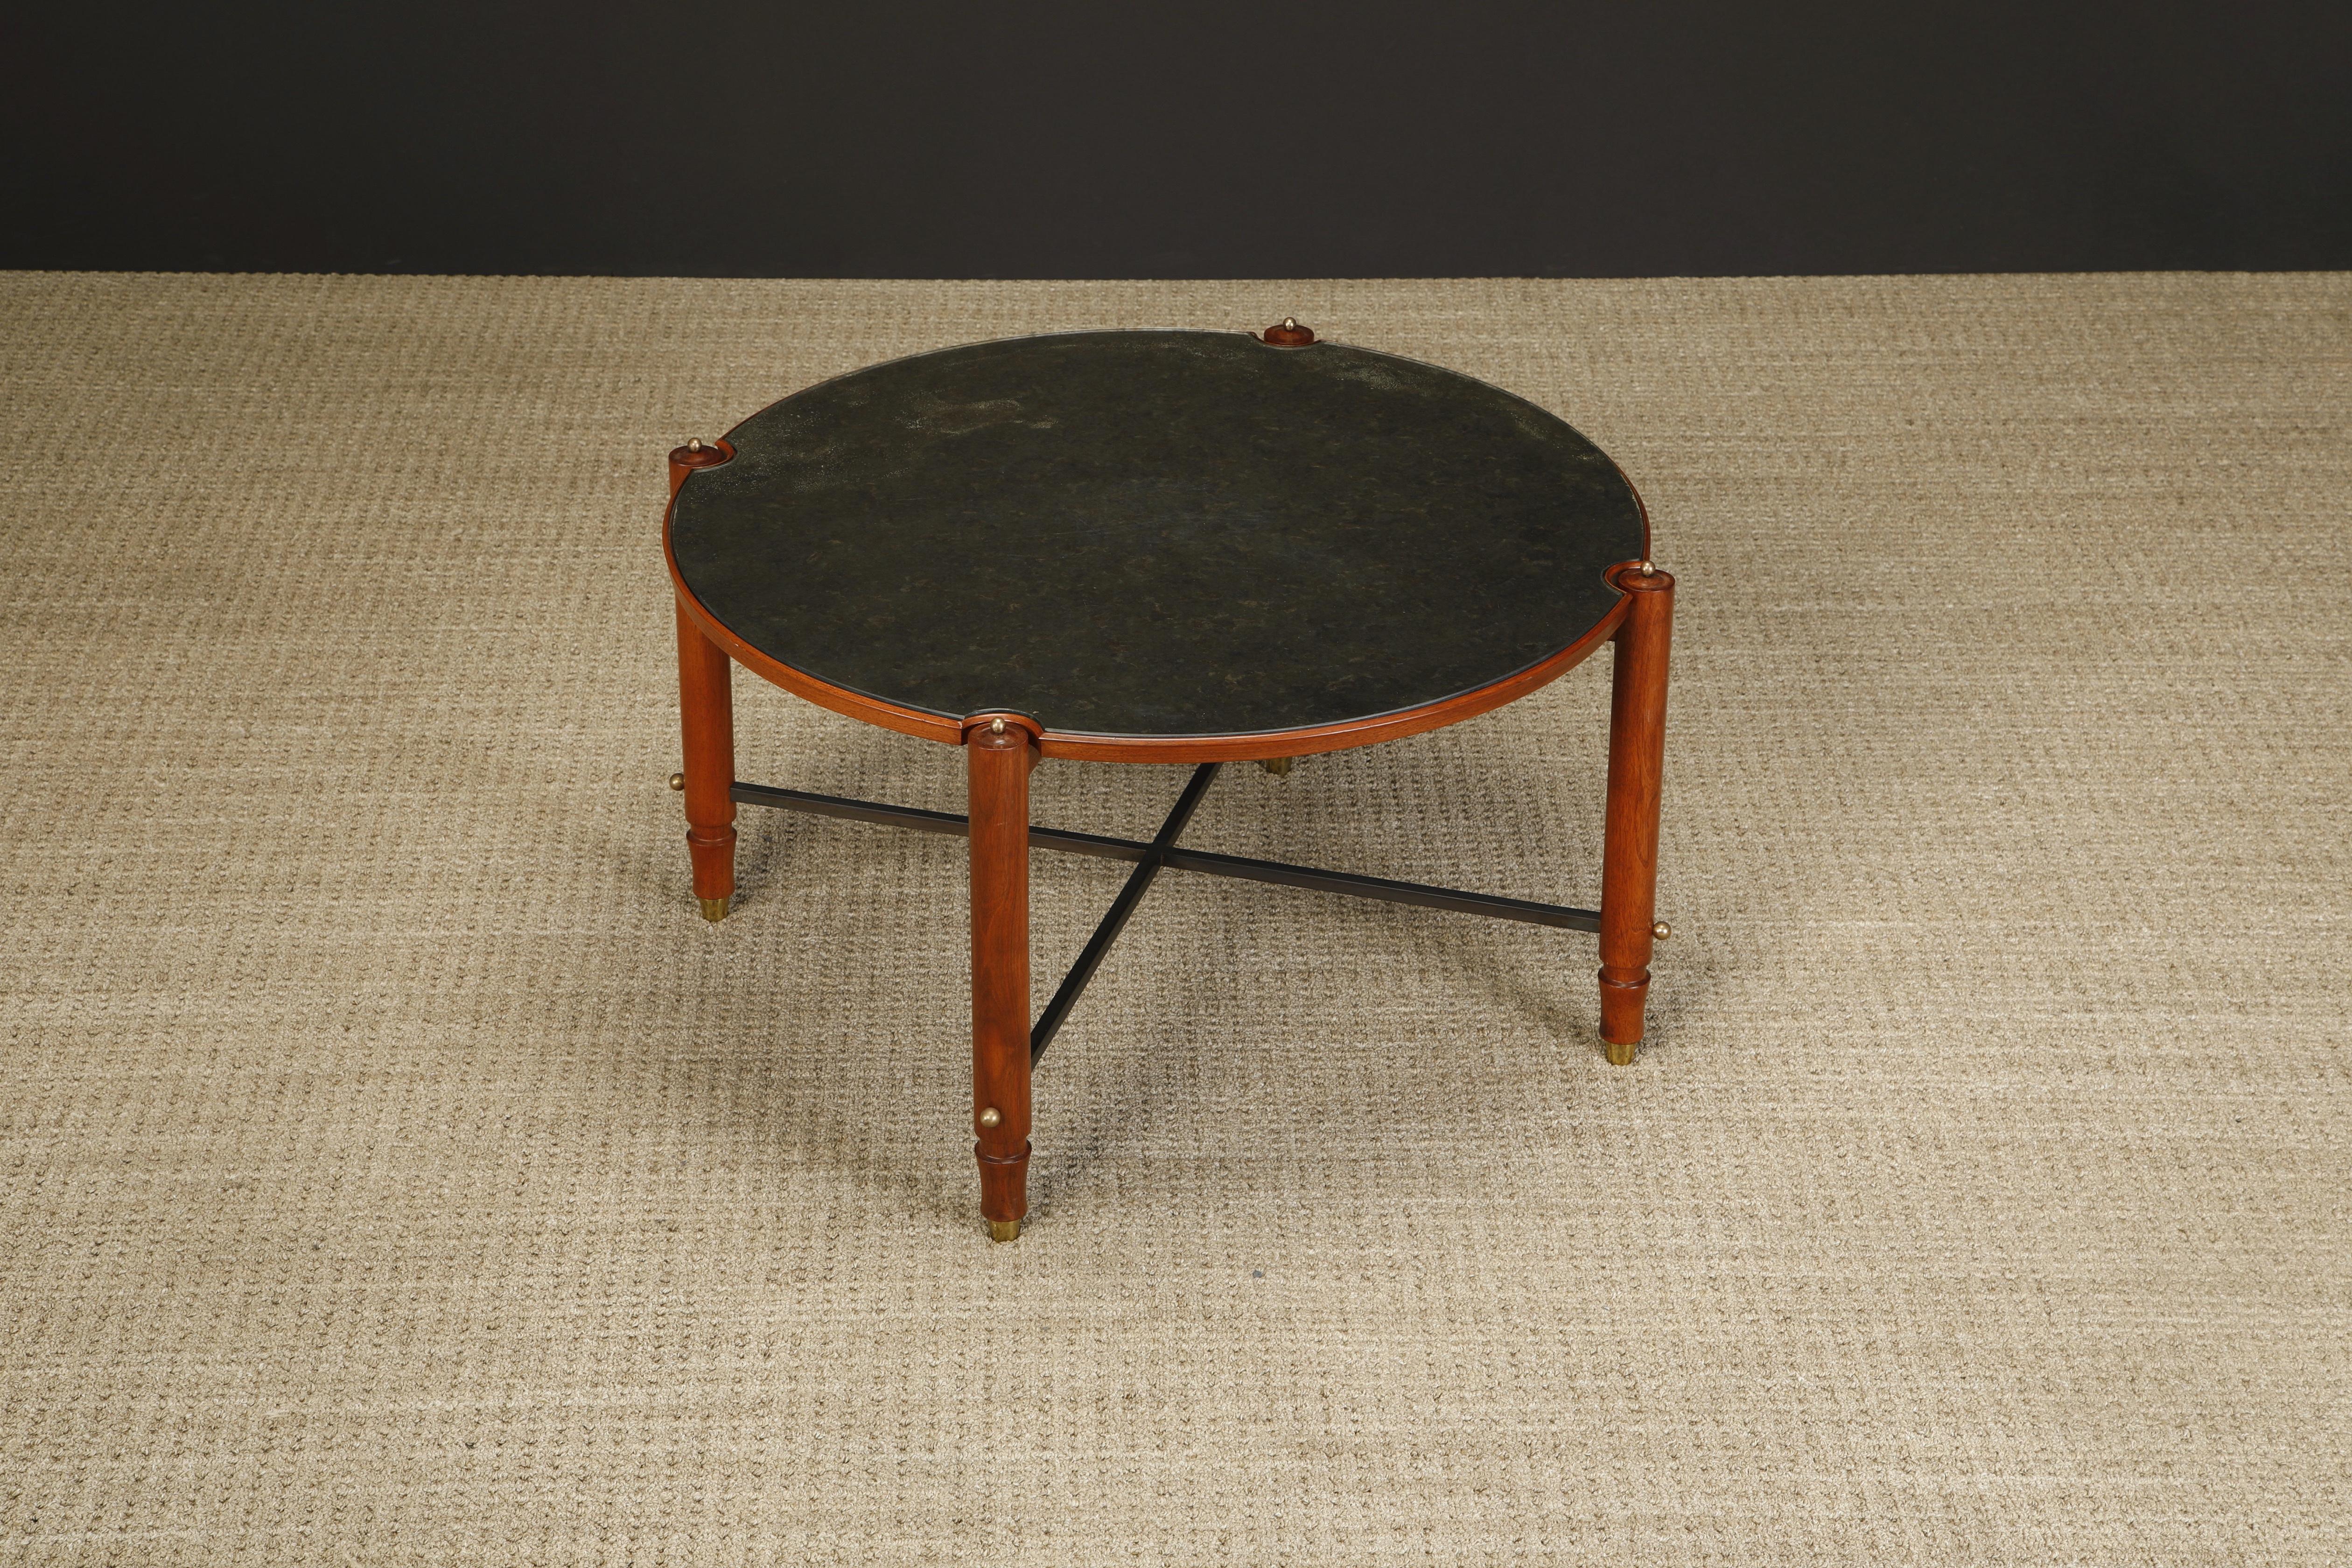 This exquisite coffee table by Jules Leleu was executed in circa 1957 France, in Mahogany with patinated metal stretchers, brass accents and a antiqued mirrored glass top. Documented in Leleu Decorateurs Ensembliers by Francoise Siriex, the